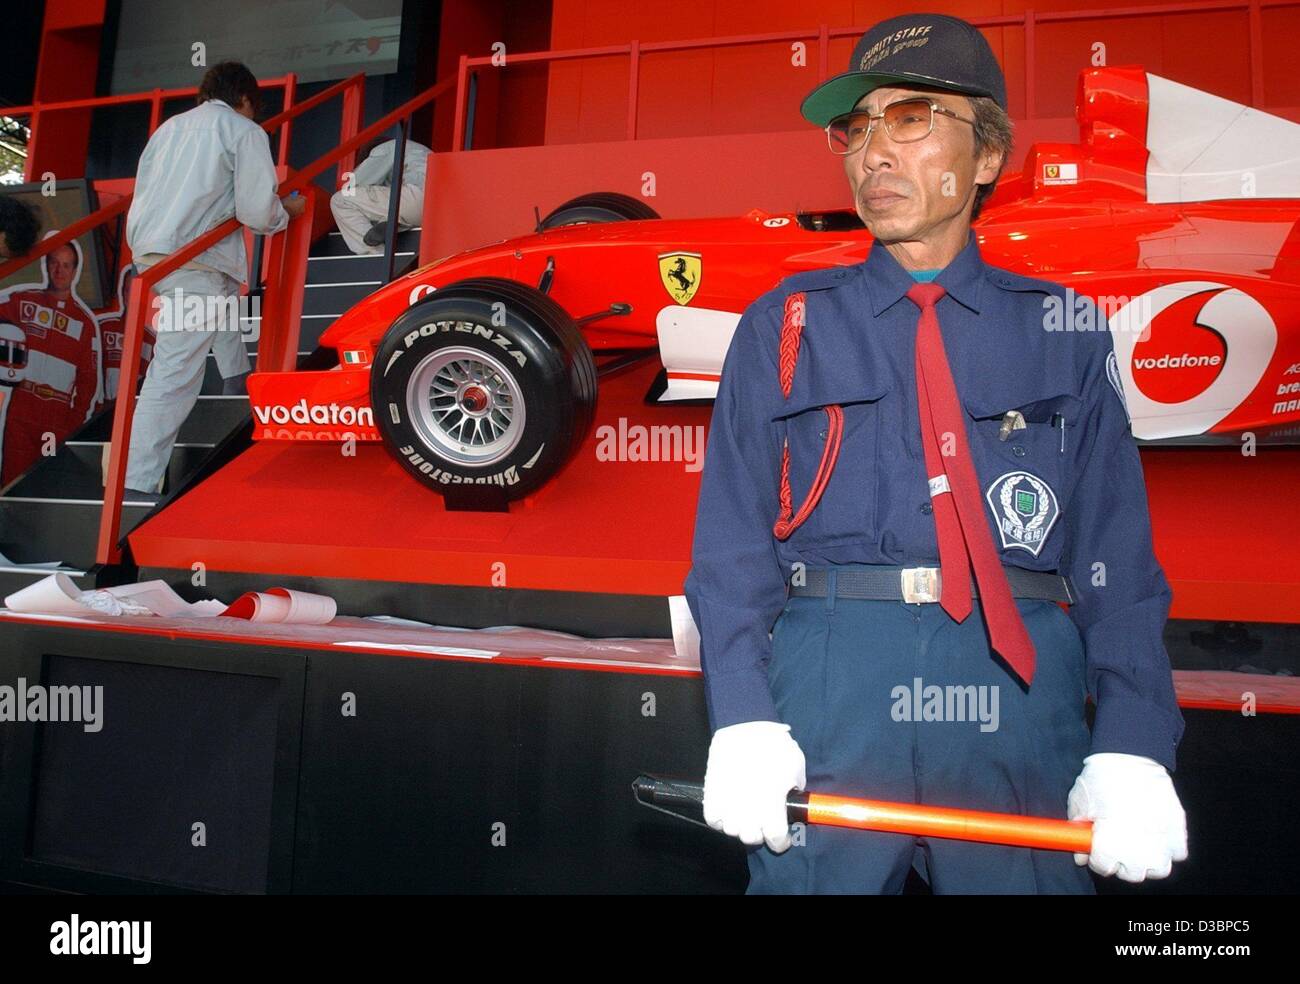 (dpa) - A Japanese security guard protects a Ferrari race car on the race track in Suzuka, Japan, 9 October 2003. The decisive race of the formula one world championship will take place in Suzuka, around 300 kilometres south of Tokyo on 12 October 2003. Stock Photo